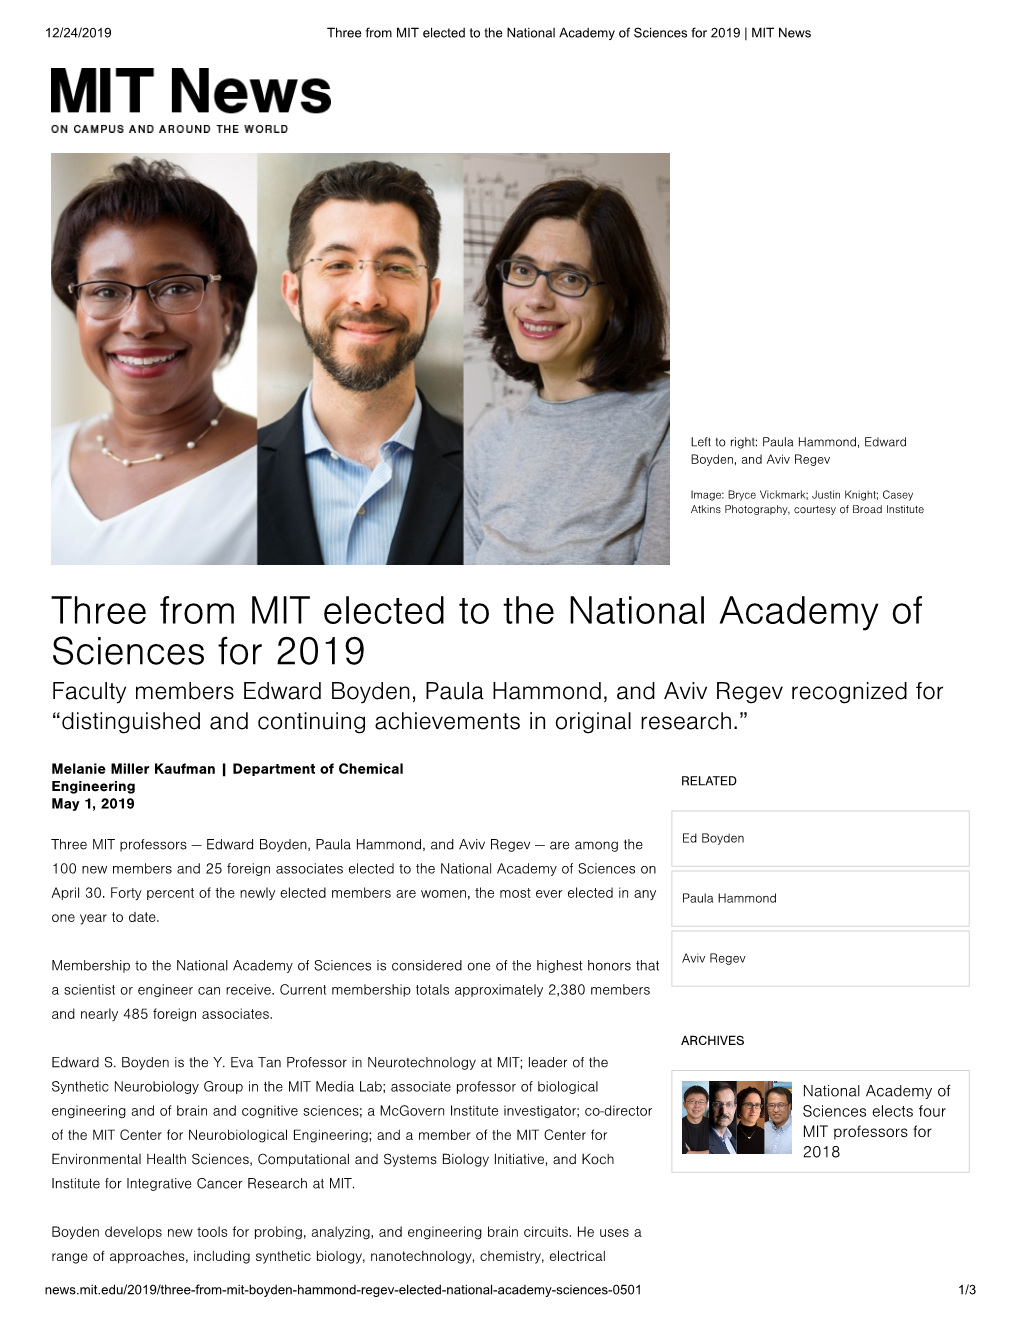 Three from MIT Elected to the National Academy of Sciences for 2019 | MIT News